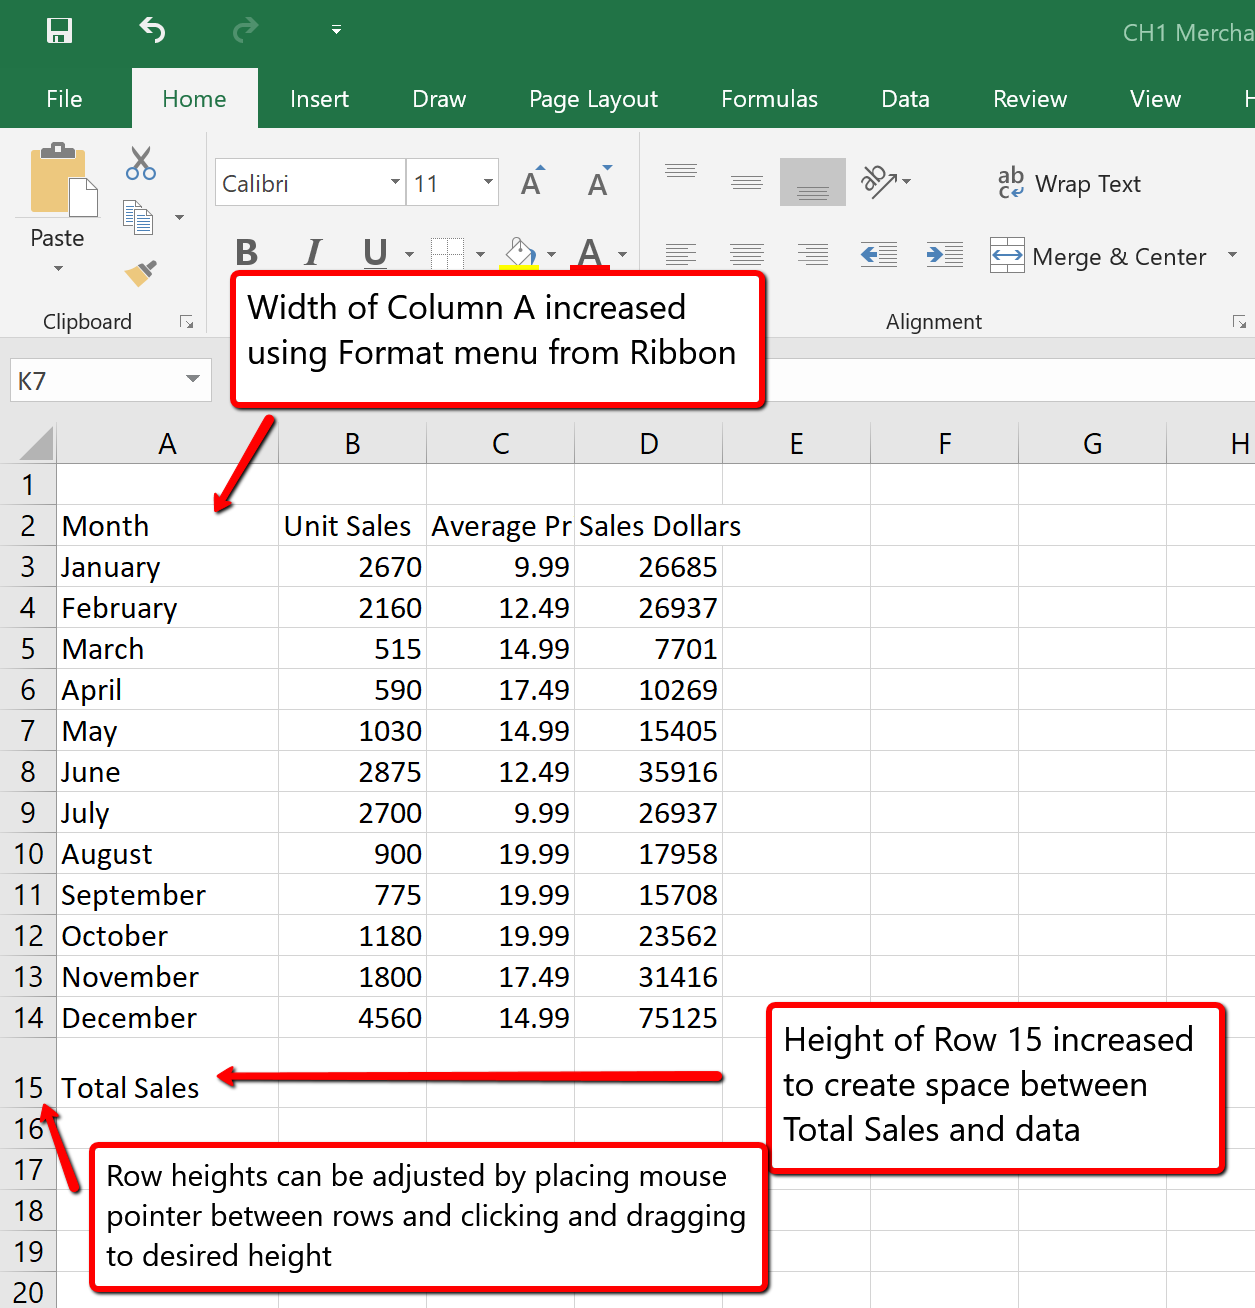 Column A width increased, Row 15 height increased to create space between totals and rest of data.